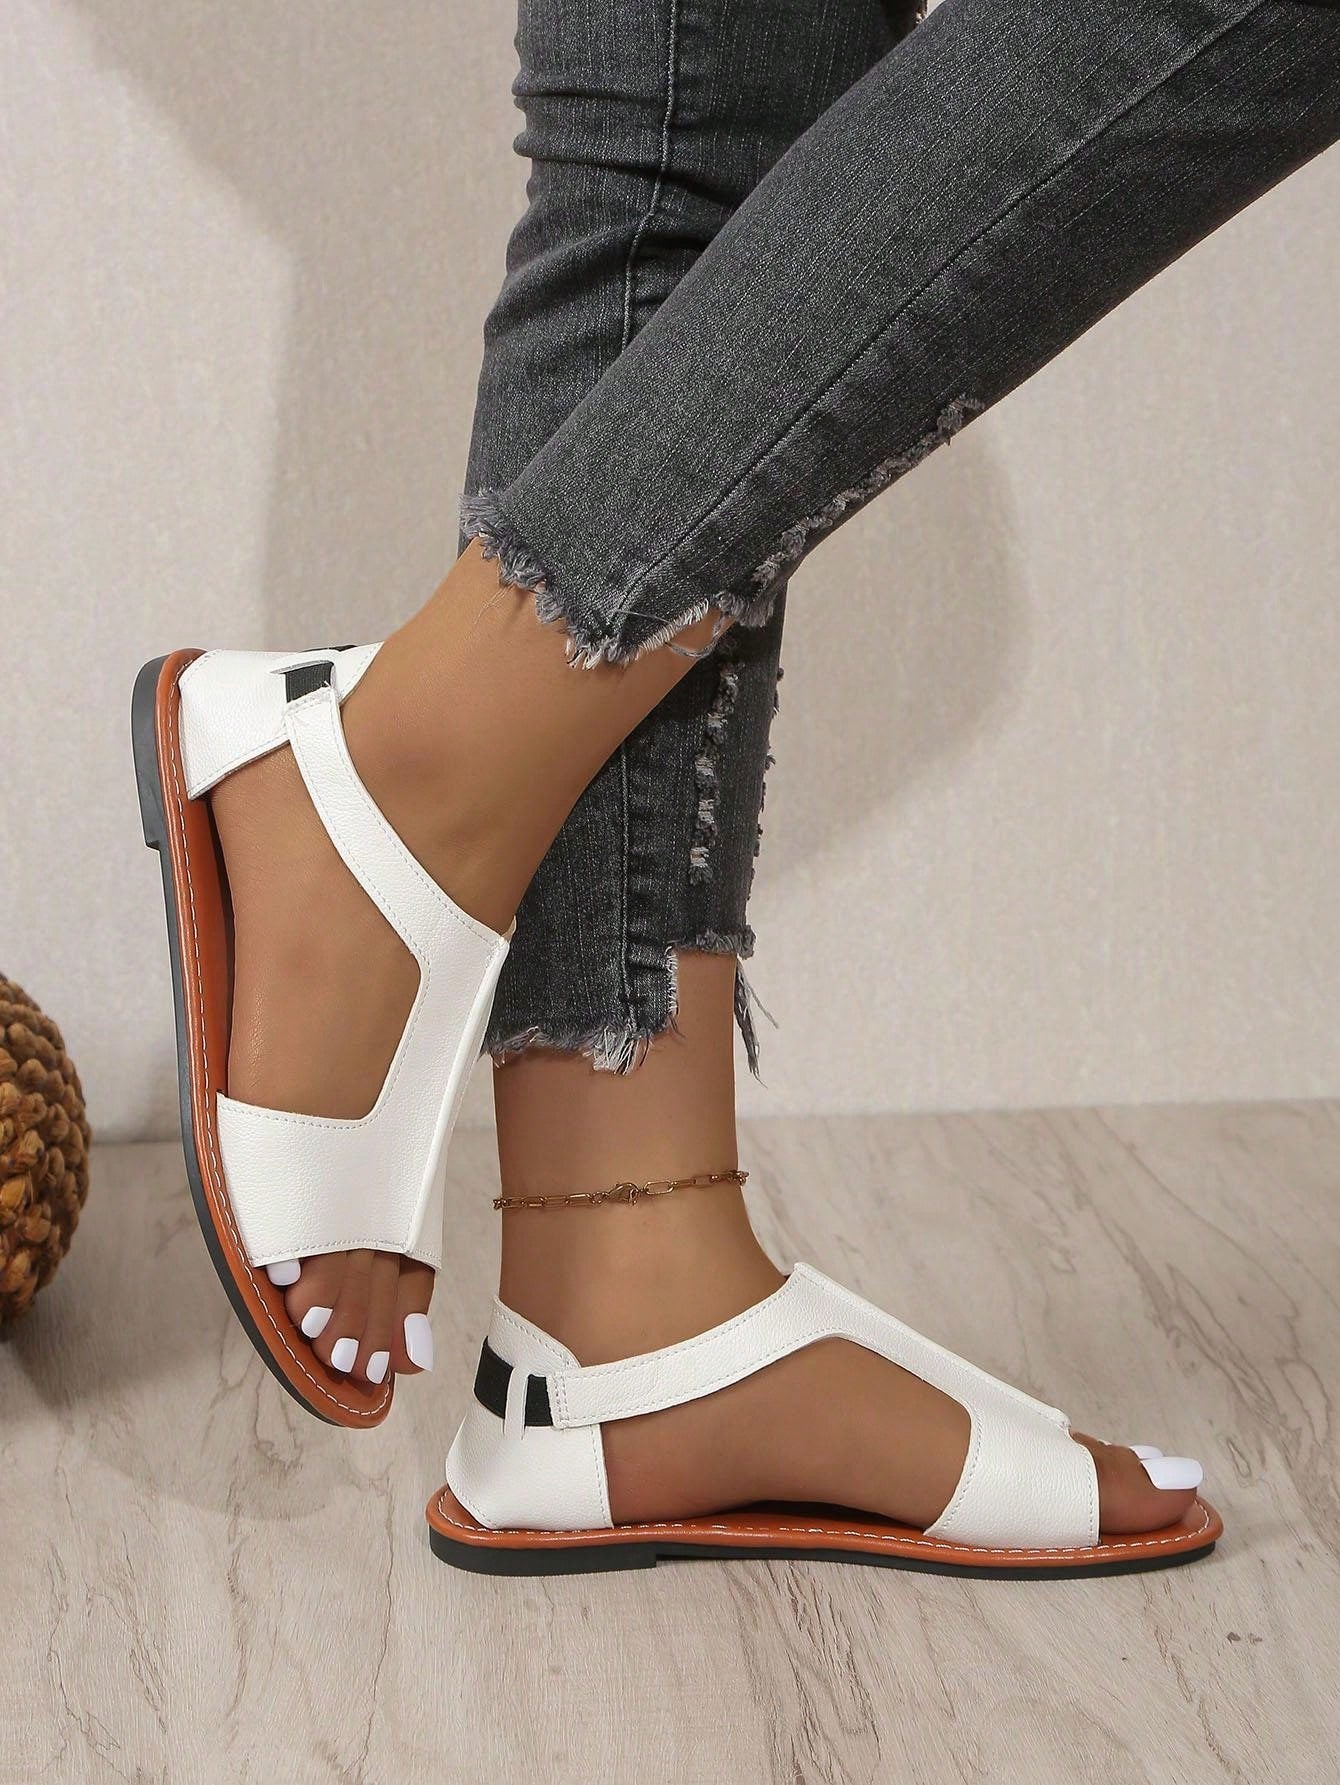 New Women Casual Comfortable Slip-On Flat Sandals With College Style Made Of Leather, Ideal For Beach Party And Music Festival-White-12